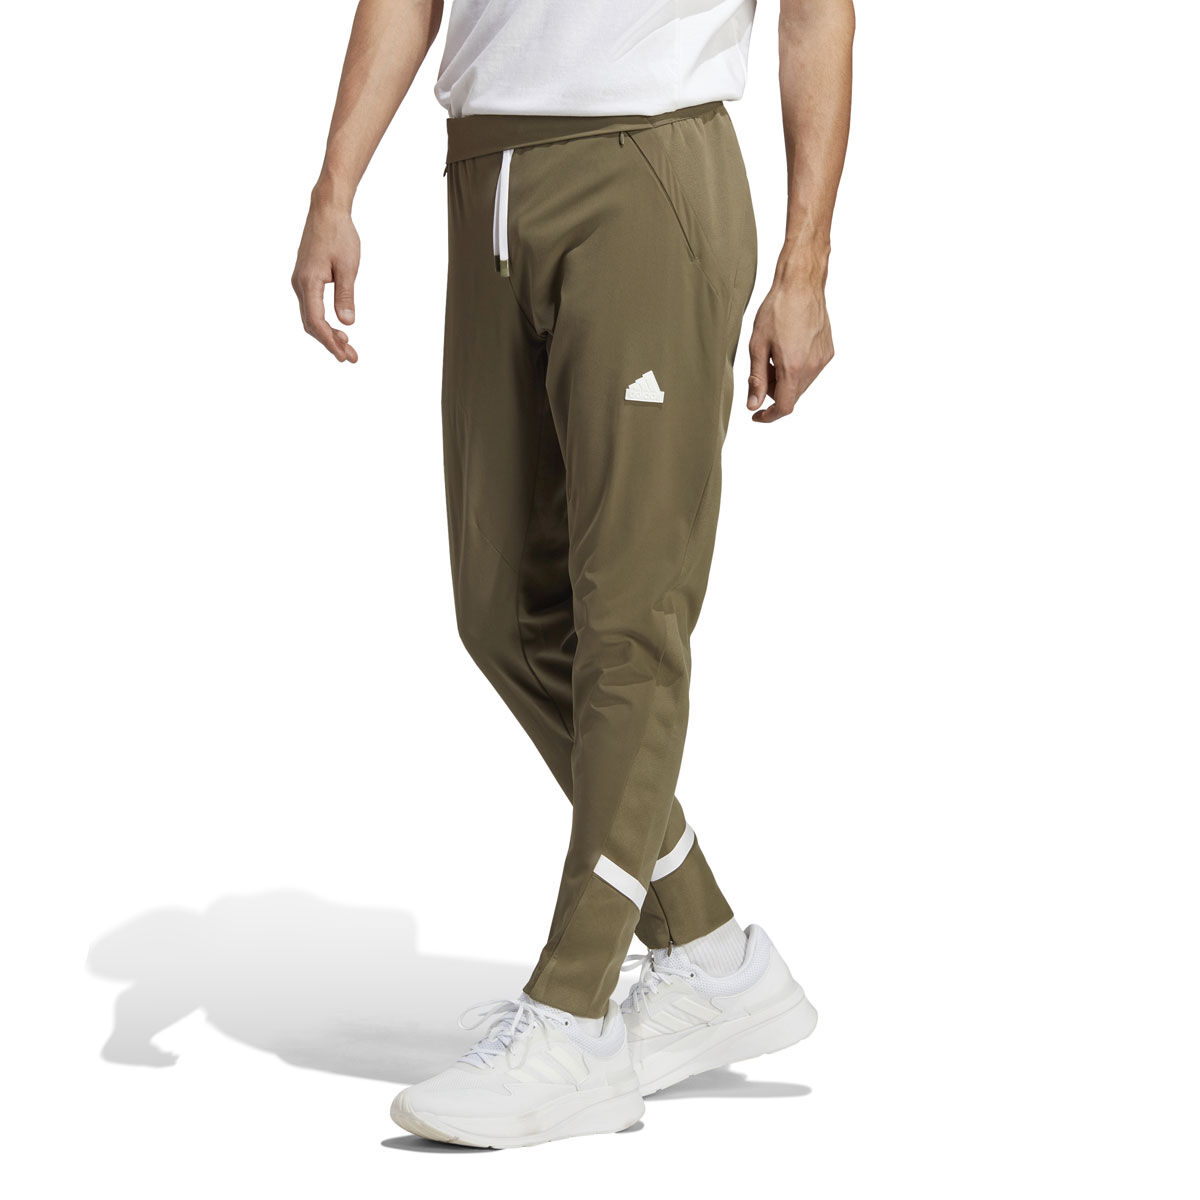 Adidas Designed For Gameday Pants Beige Mens Training 58 OFF